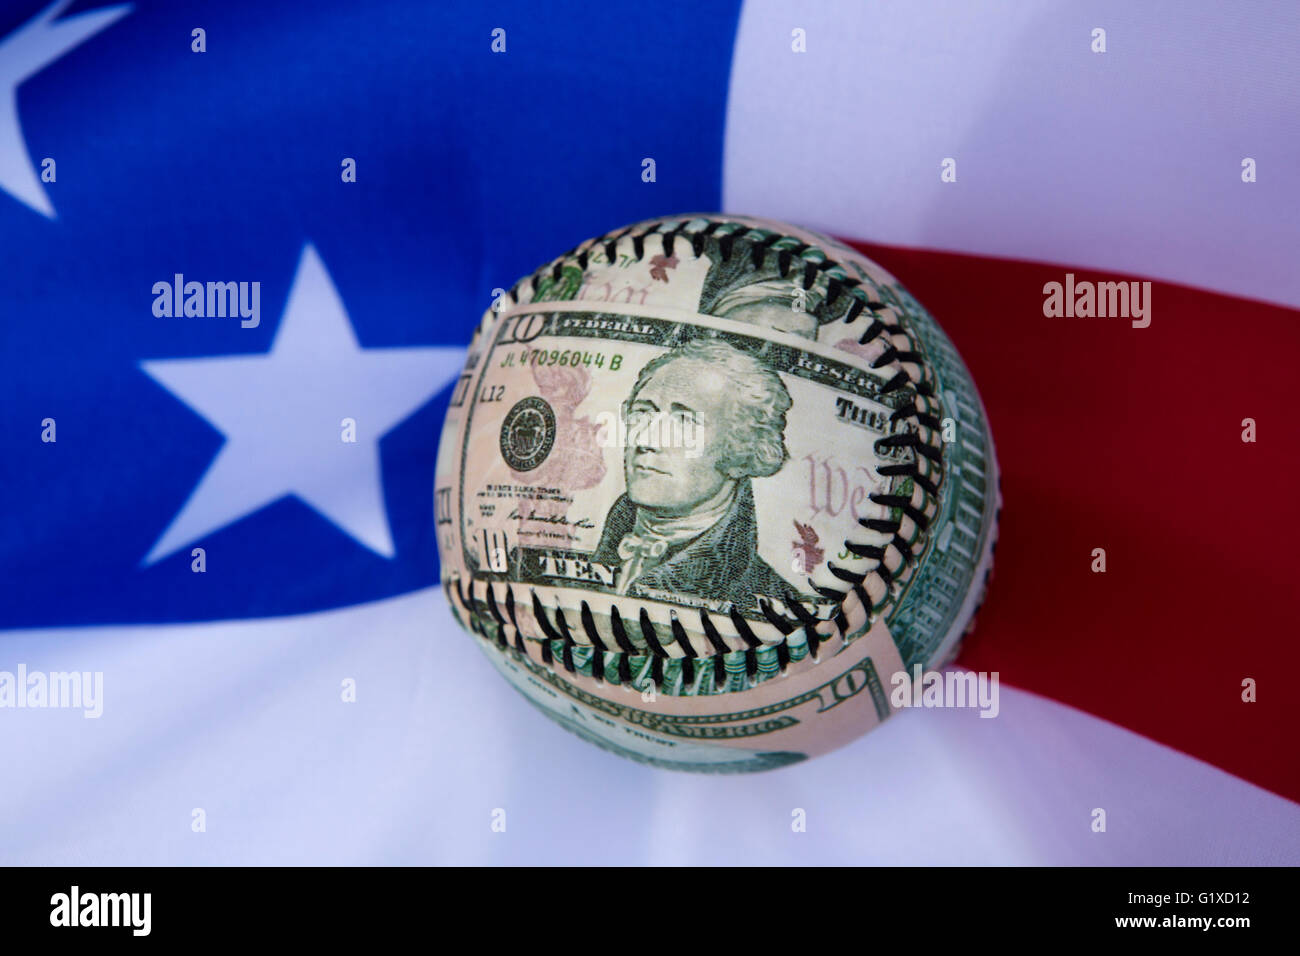 A baseball bearing the image of Alexander Hamilton, one of the Founding Fathers of the United States of America. Stock Photo